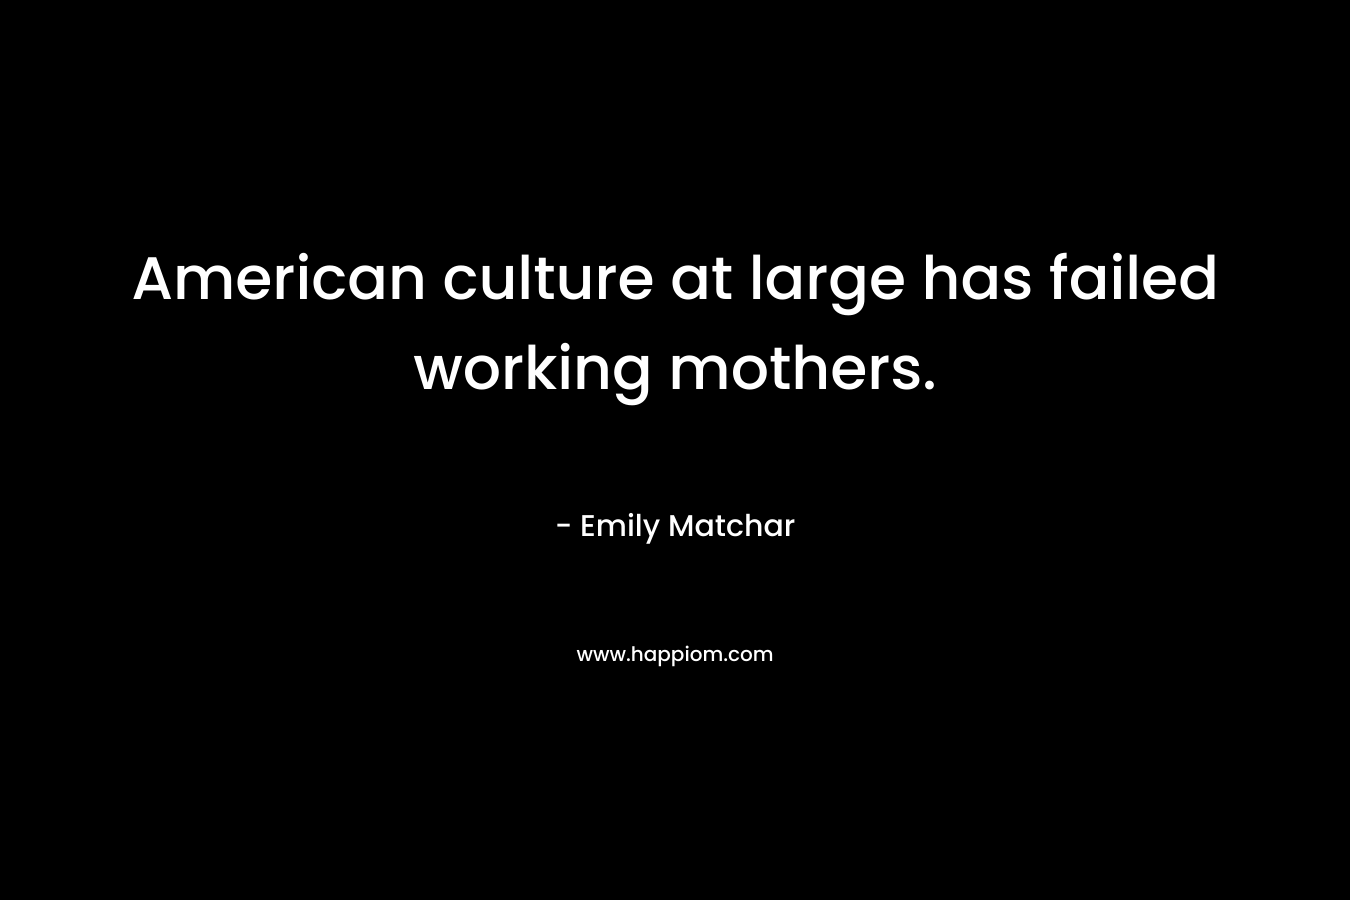 American culture at large has failed working mothers.